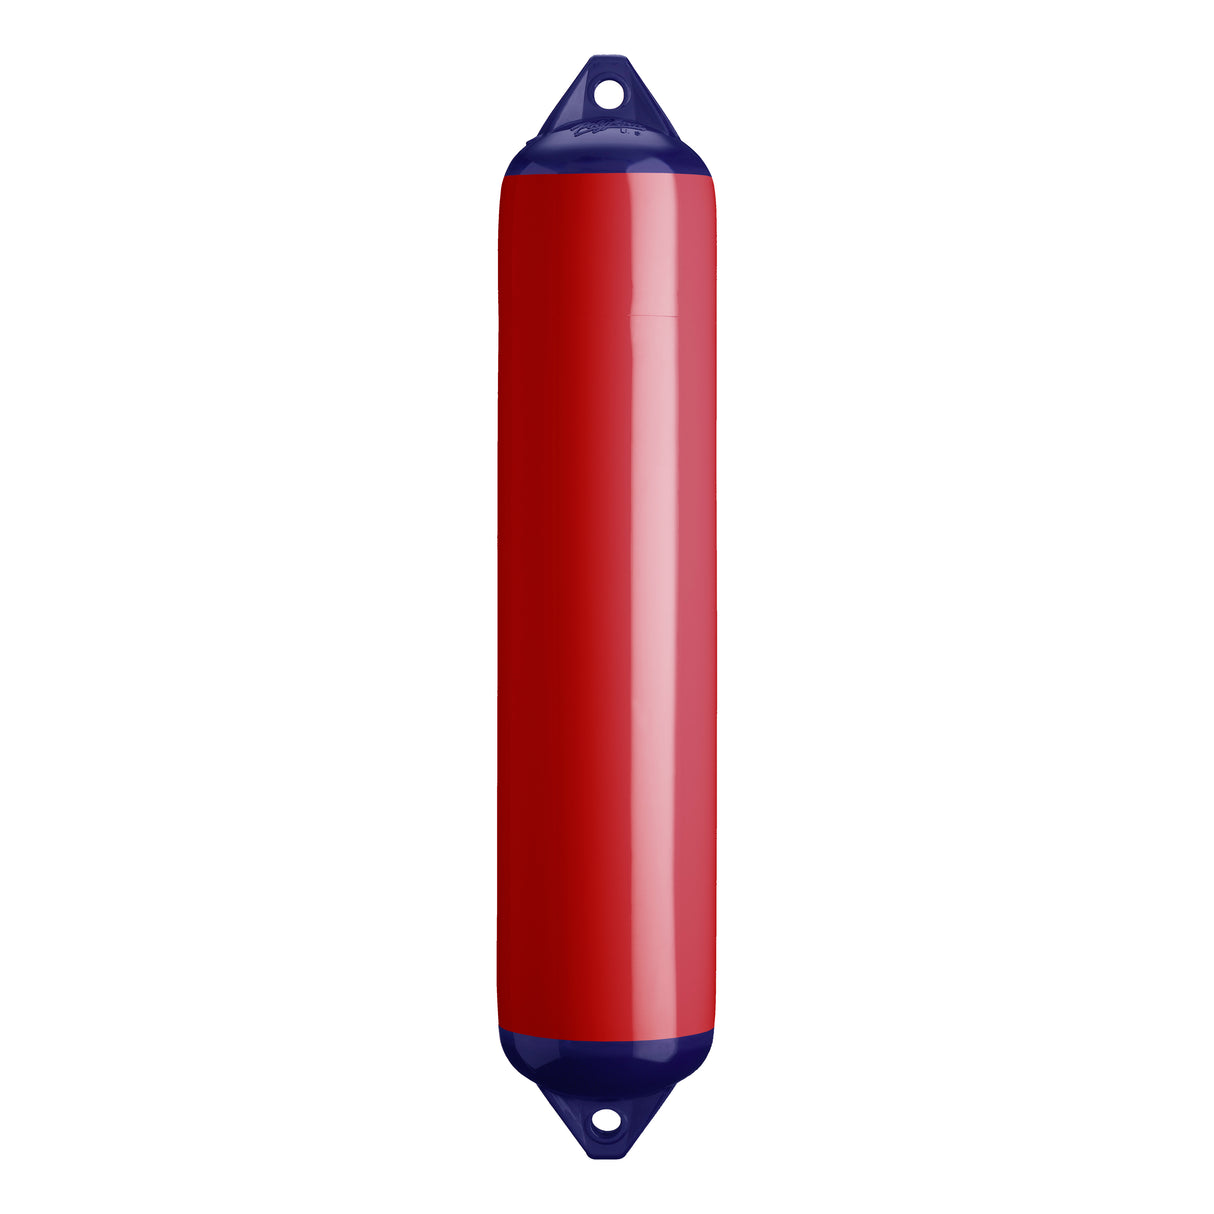 Classic Red boat fender with Navy-Top, Polyform F-4 